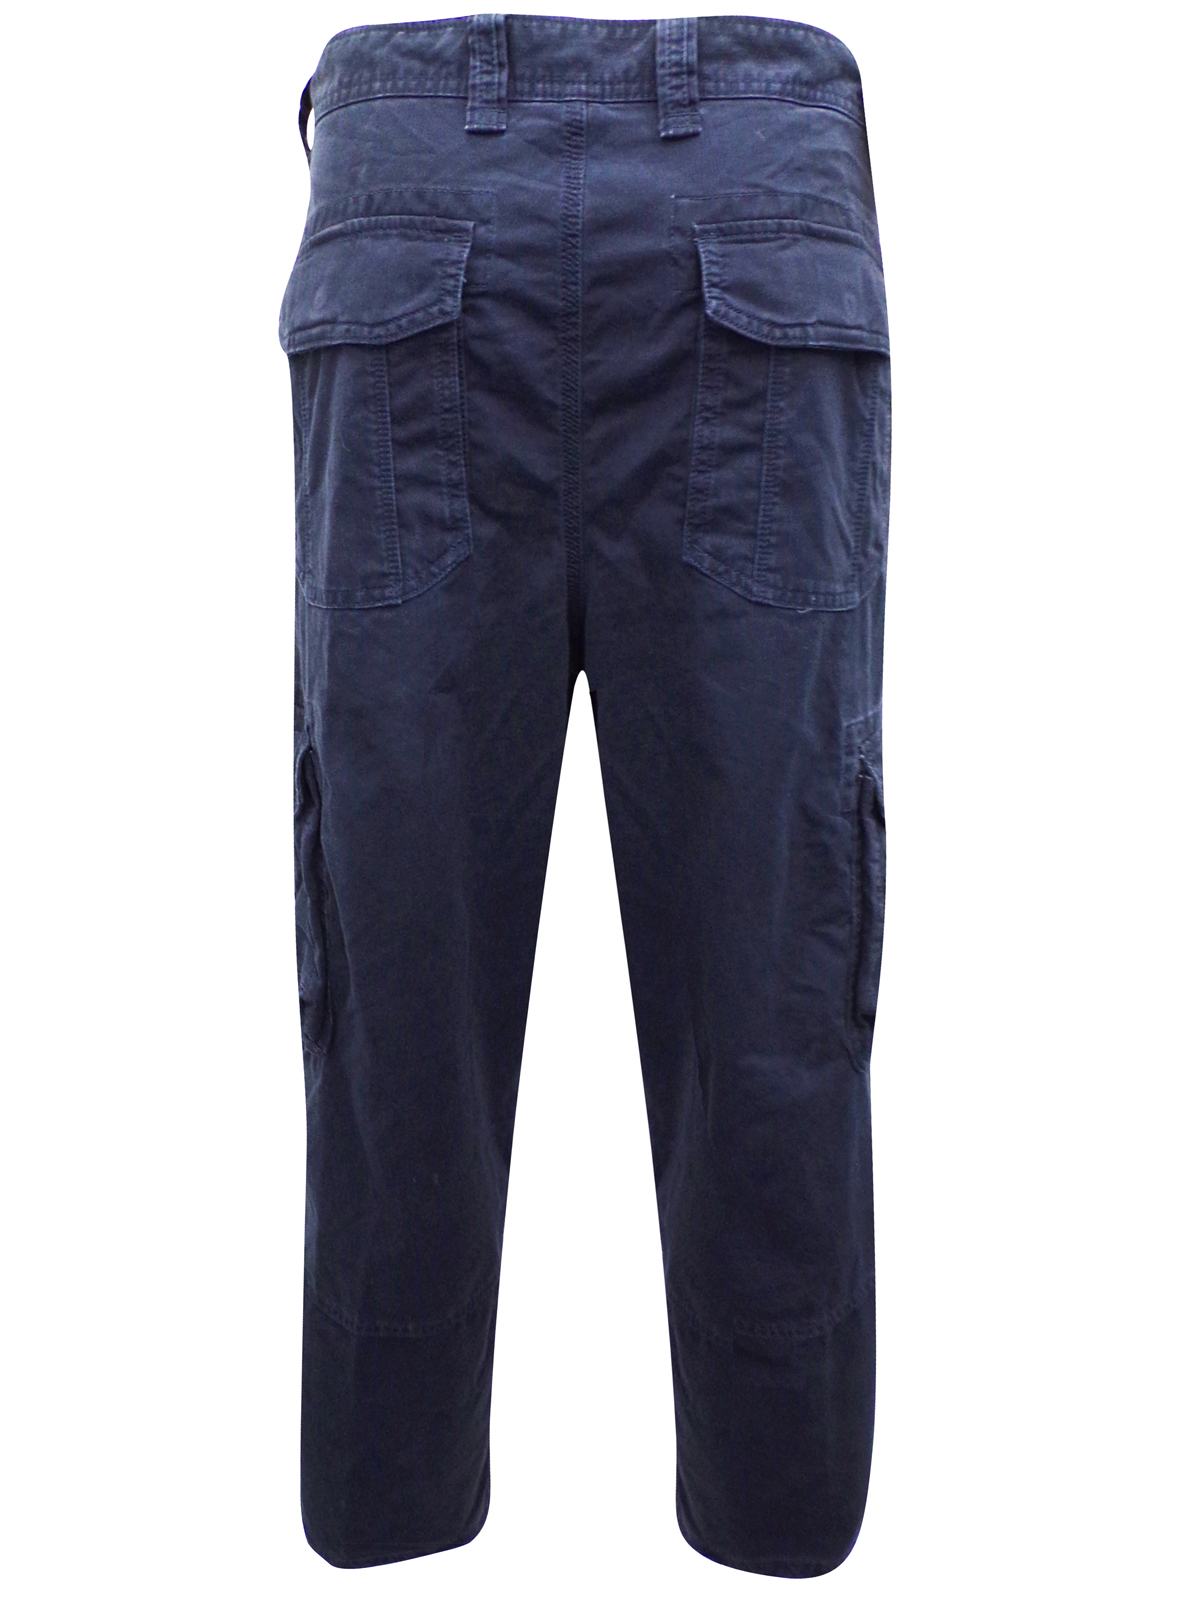 Marks and Spencer - - M&5 N0rth C0ast NAVY Pure Cotton Cargo Trousers ...